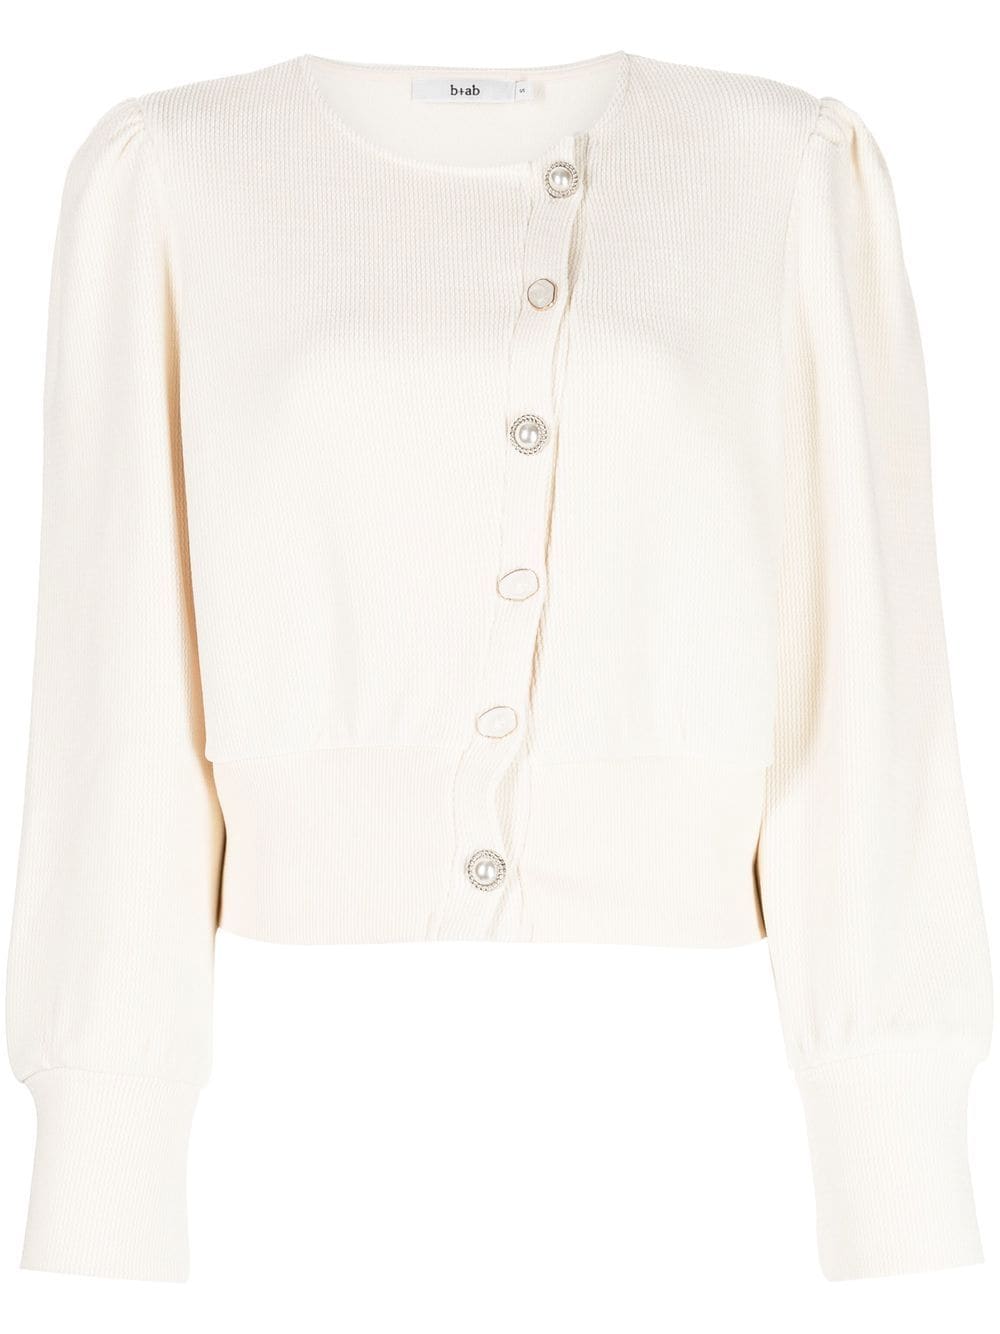 b+ab off-centre button-up cardigan - White